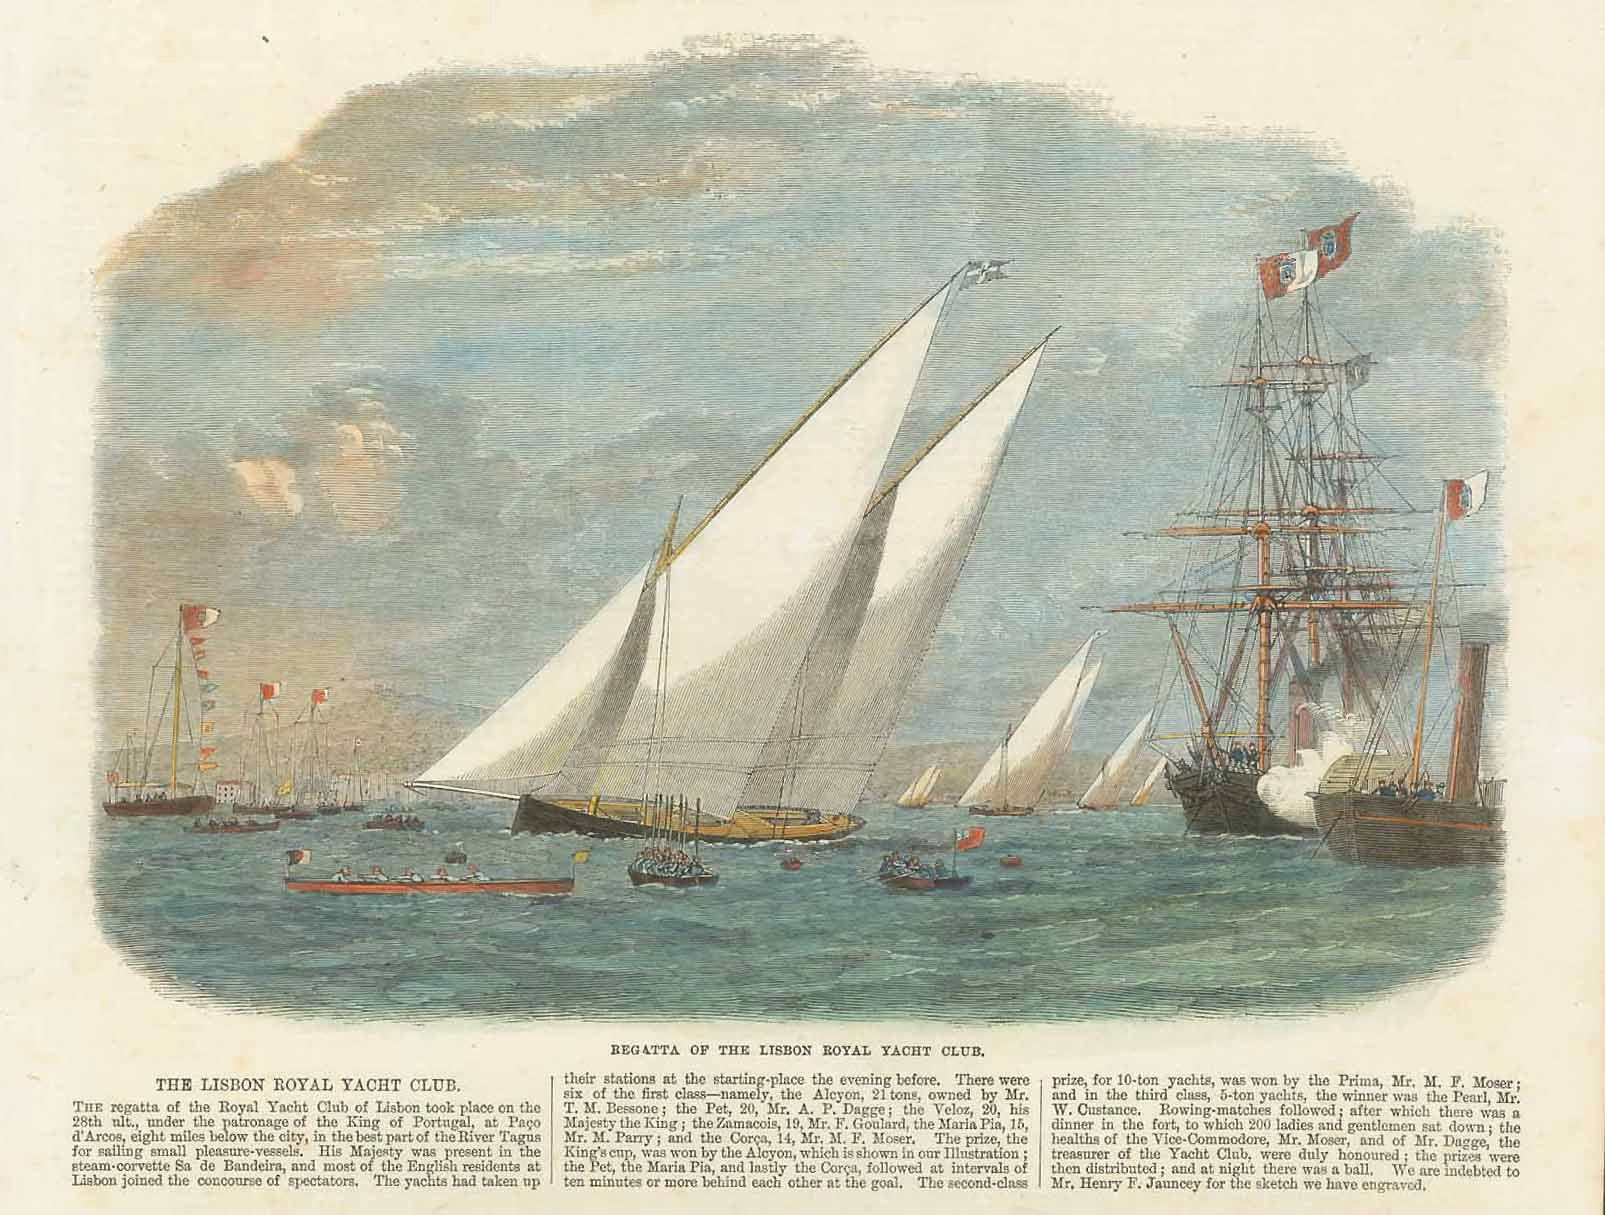 Lisbon. - "Regatta of the Lisbon Royal Yacht Club"  Beautifully hand-colored wood engraving of an elegant sailboat race in Lisbon.  Very good condition. Below the image is text about the Lisbon Royal Yacht Club.  Original antique print 